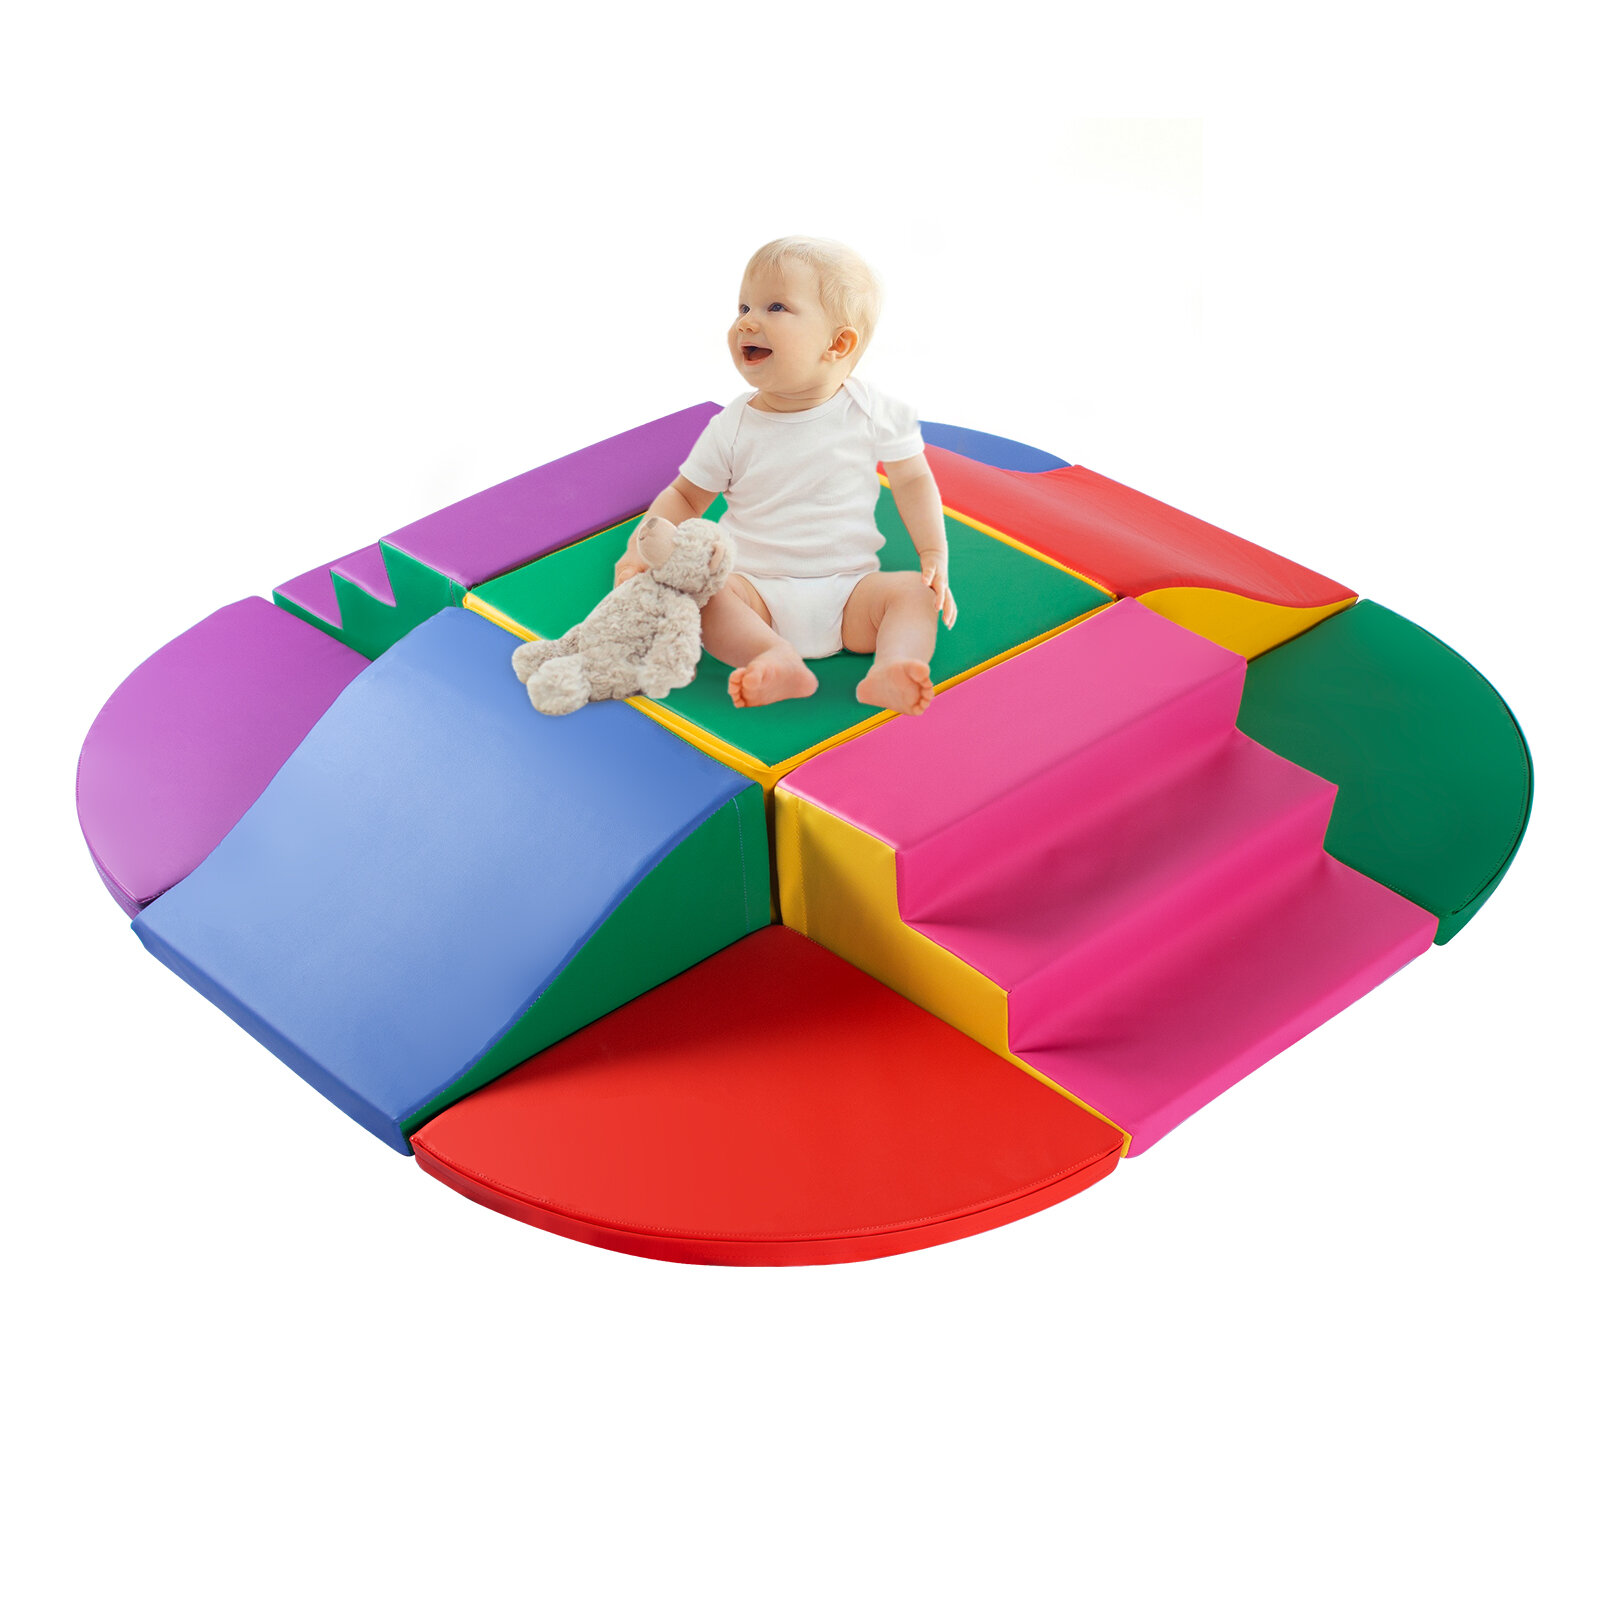 Sliding and Crawling Soft Toddler Playtime Corner Climber for Climbing Multicolor great Climb and Crawl Safe Foam Play Set 4-Piece Indoor Active Play Structure Building Blocks for Kids 